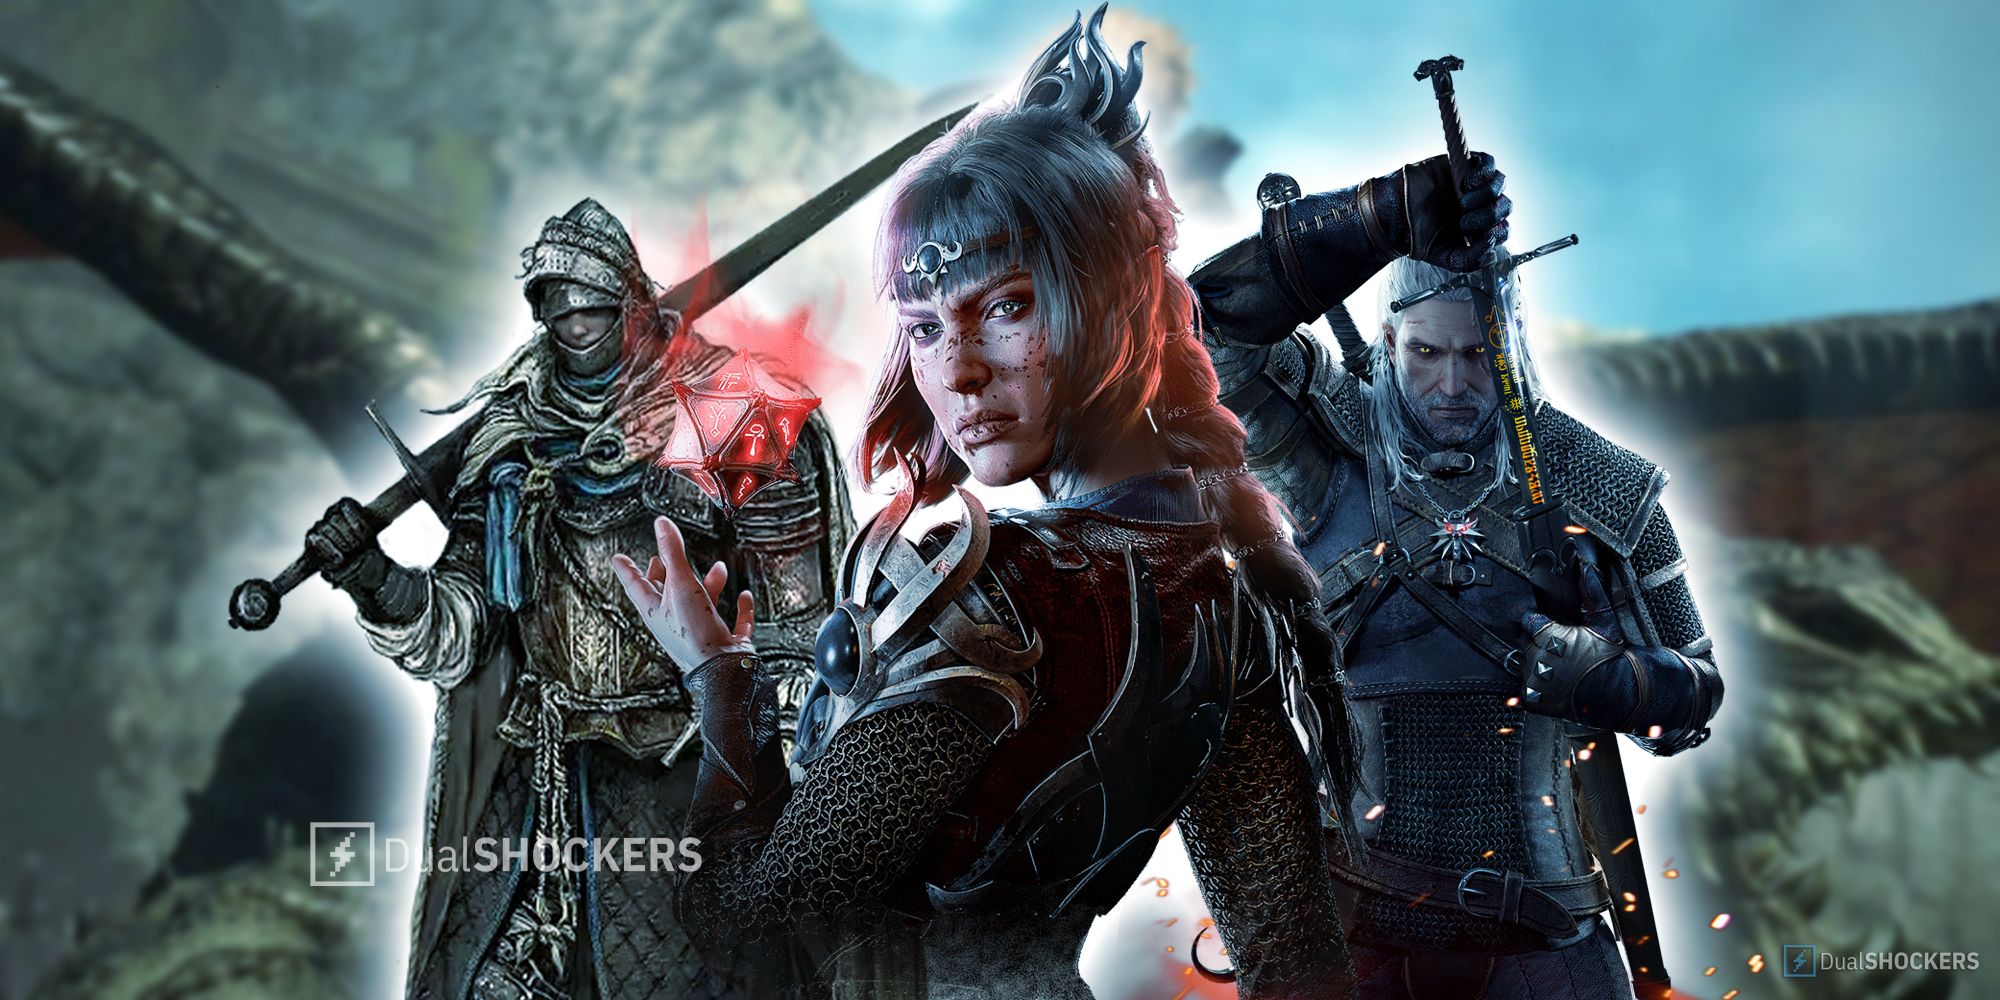 Feature image with armed characters from The Witcher and Elden Ring.